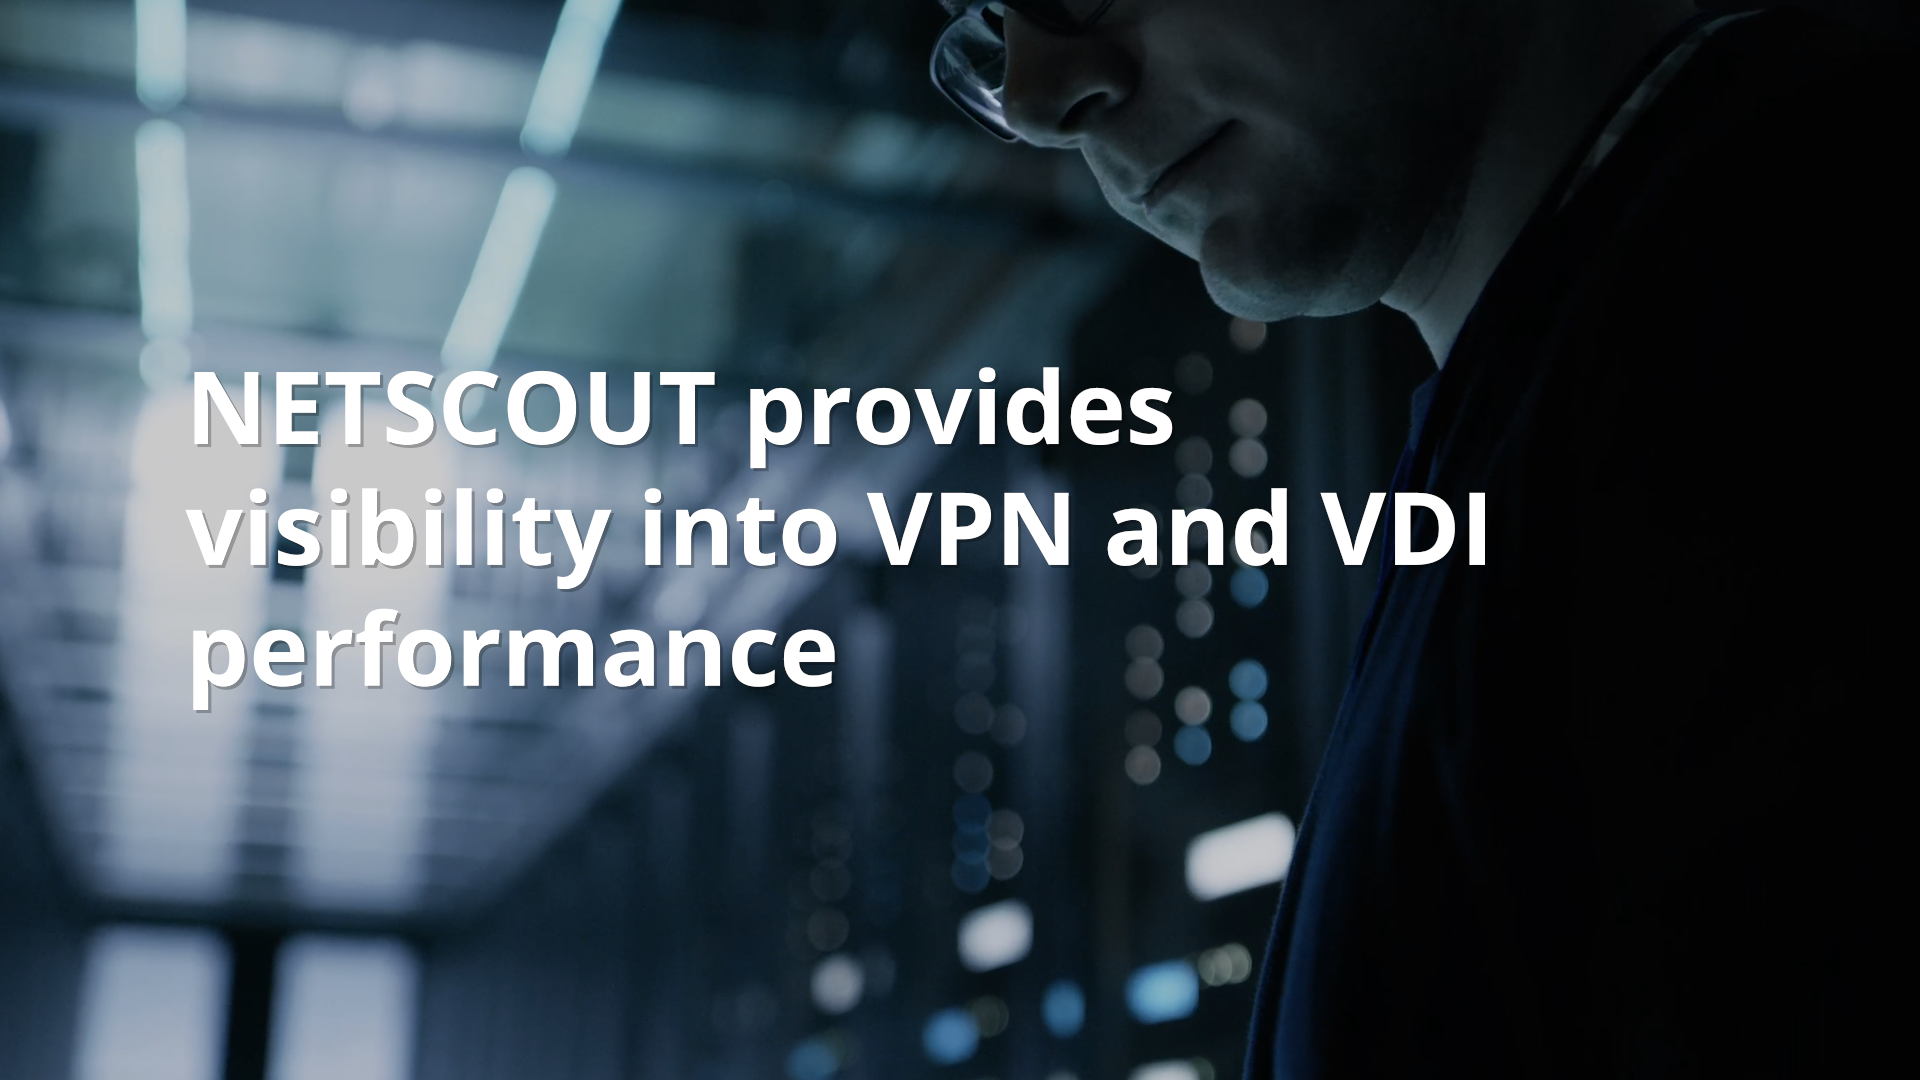 NETSCOUT provides visibility into VPN and VDI performance